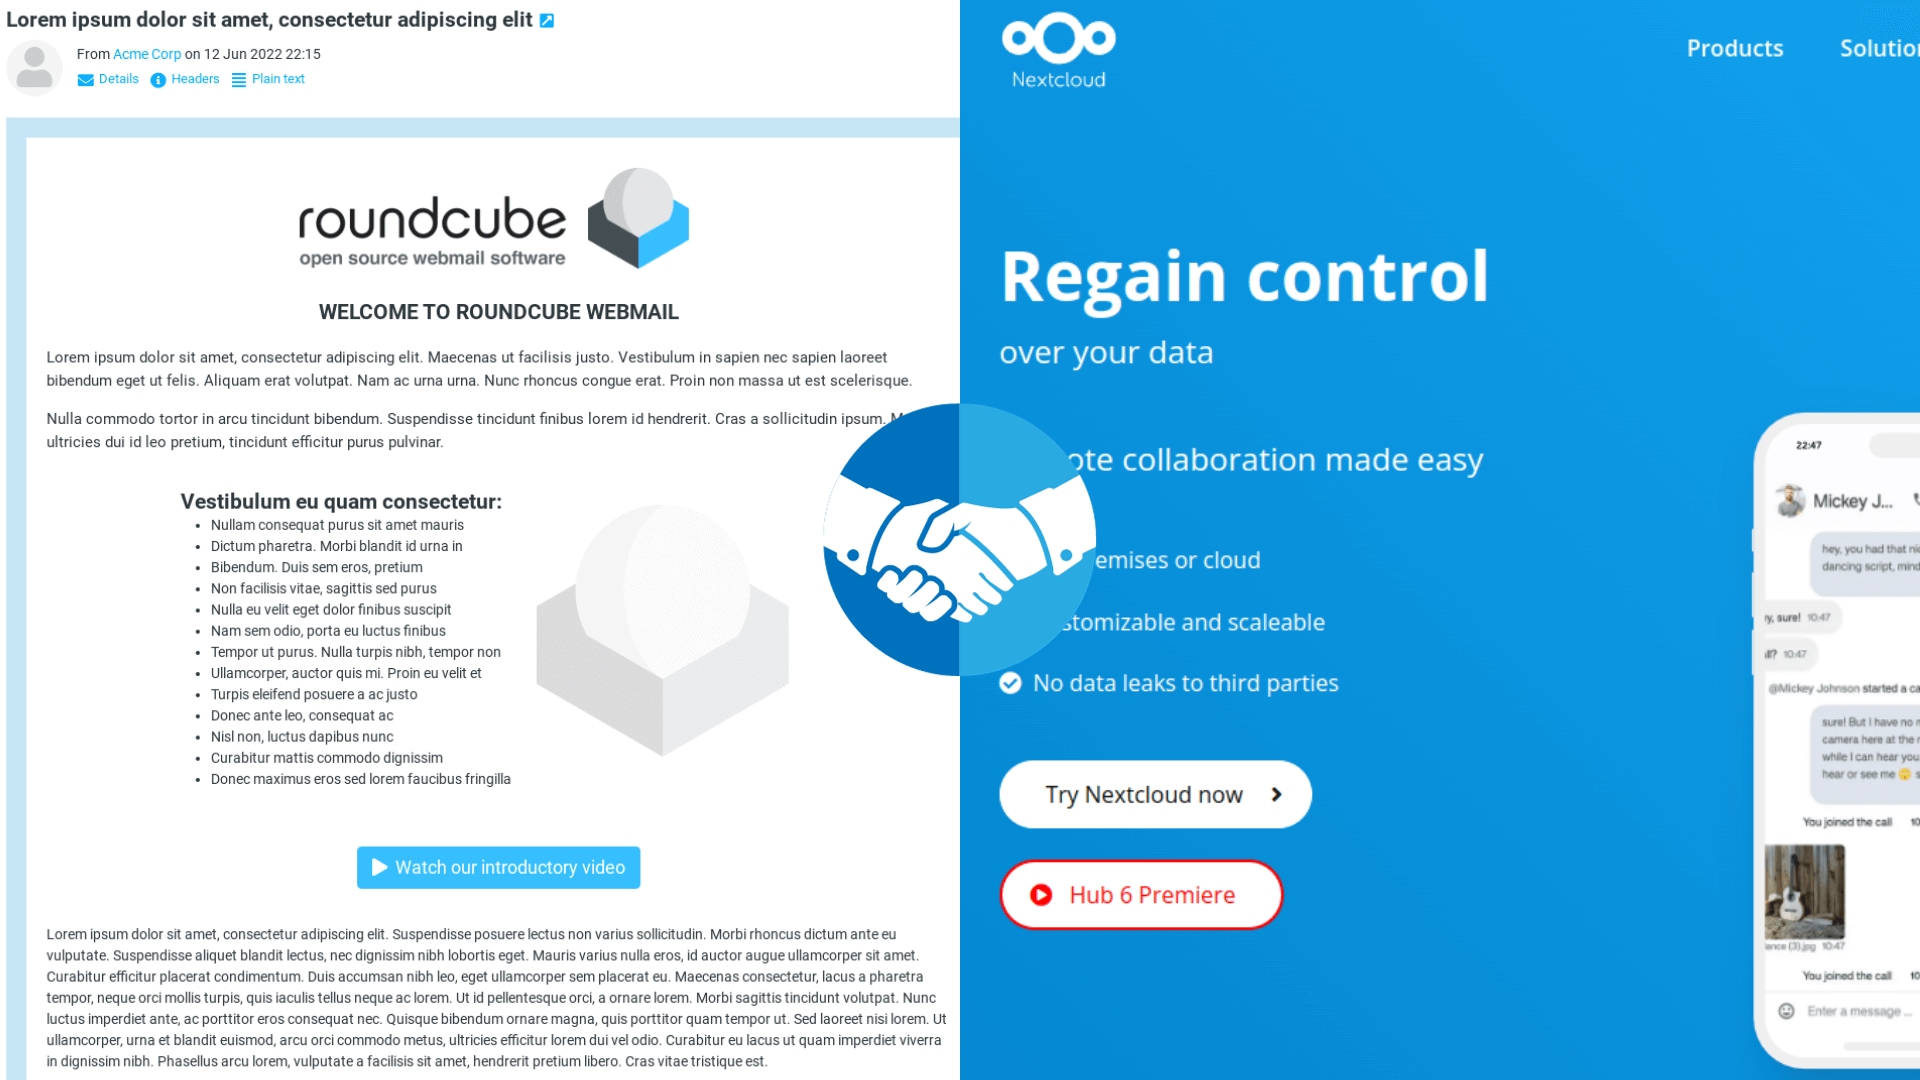 a screenshot showing a roundcube mailbox and the nextcloud homepage with a shaking hand illustration in the center